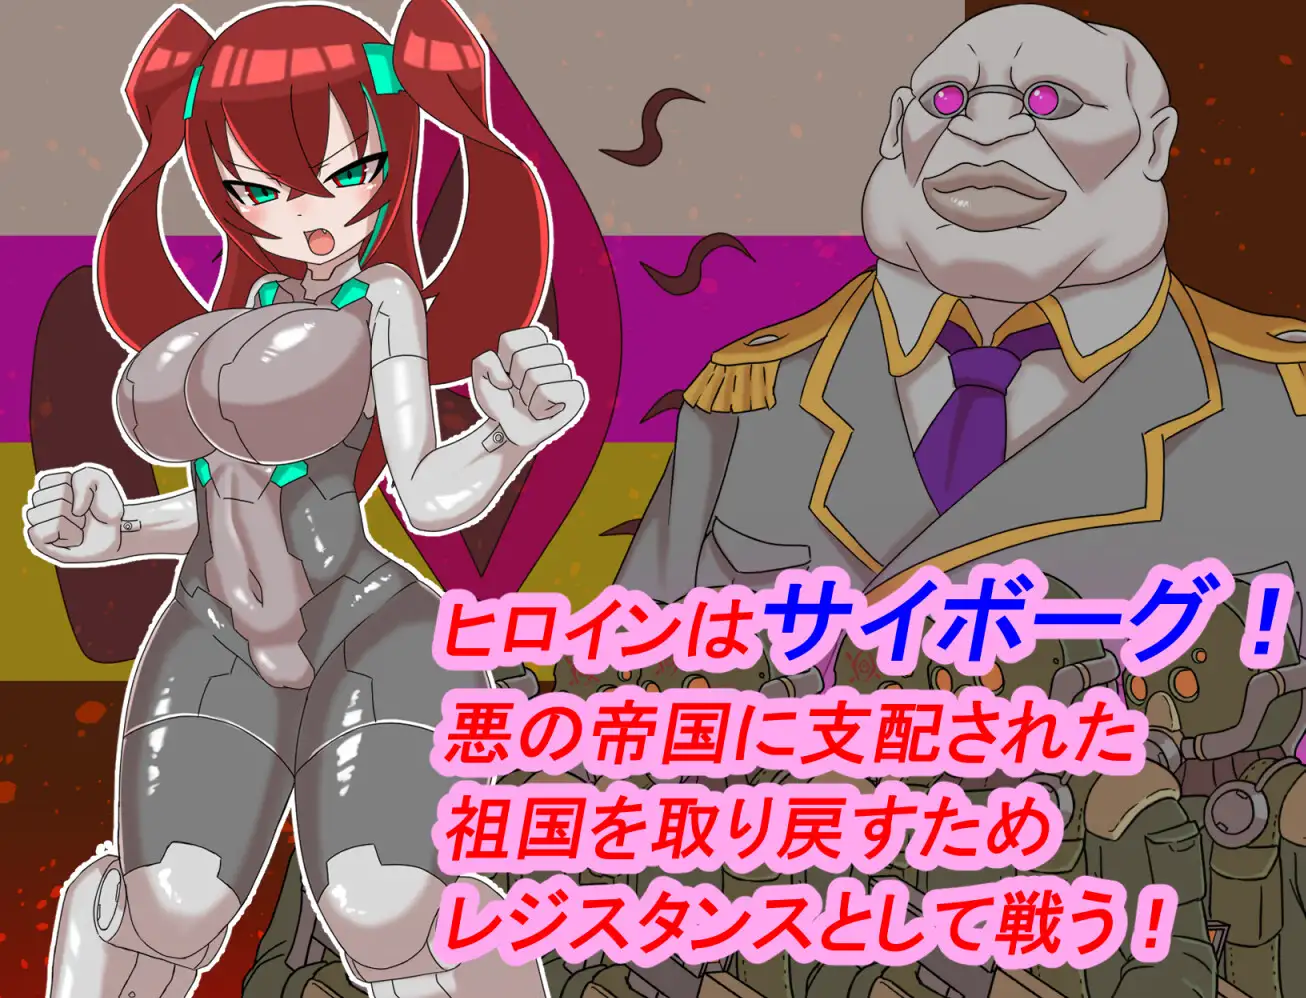 Training of the Cybernetic Heroine of Justice [V1.0] [ChinPura]